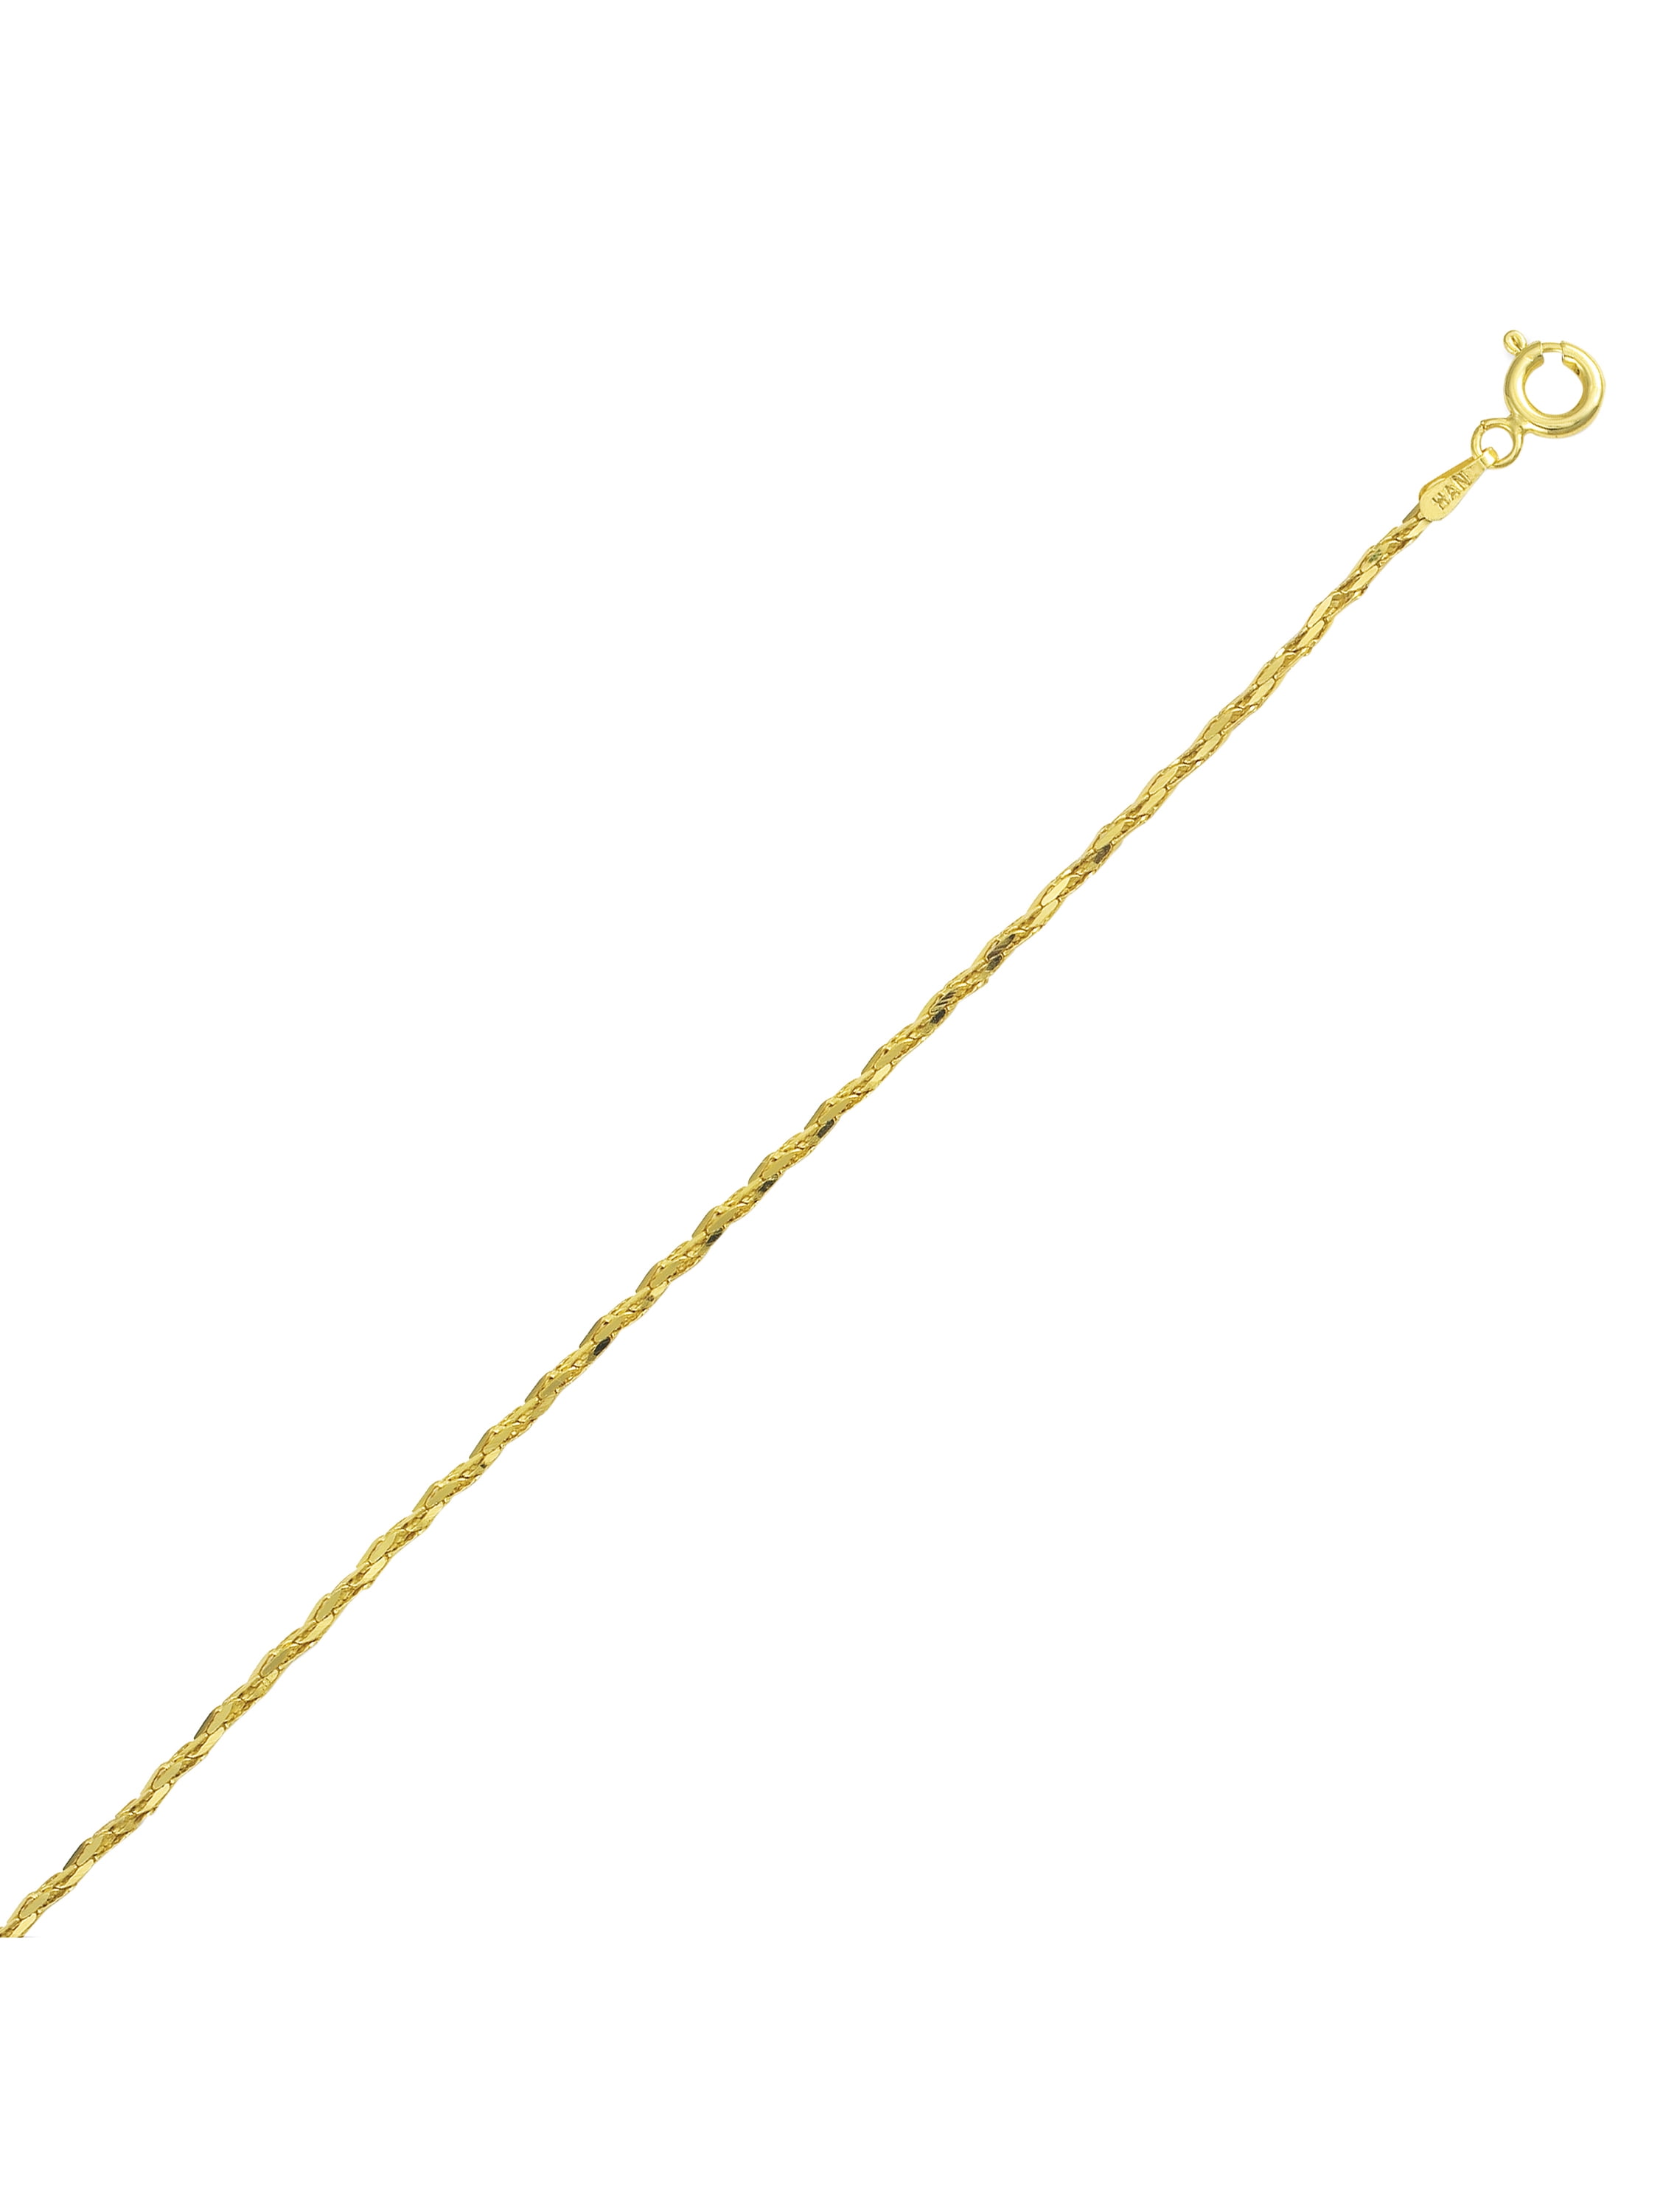 Paradise Jewelers 10K Yellow Gold 3.0mm Mariner Anchor Necklace Link Lobster Clasp 16-24 Inches